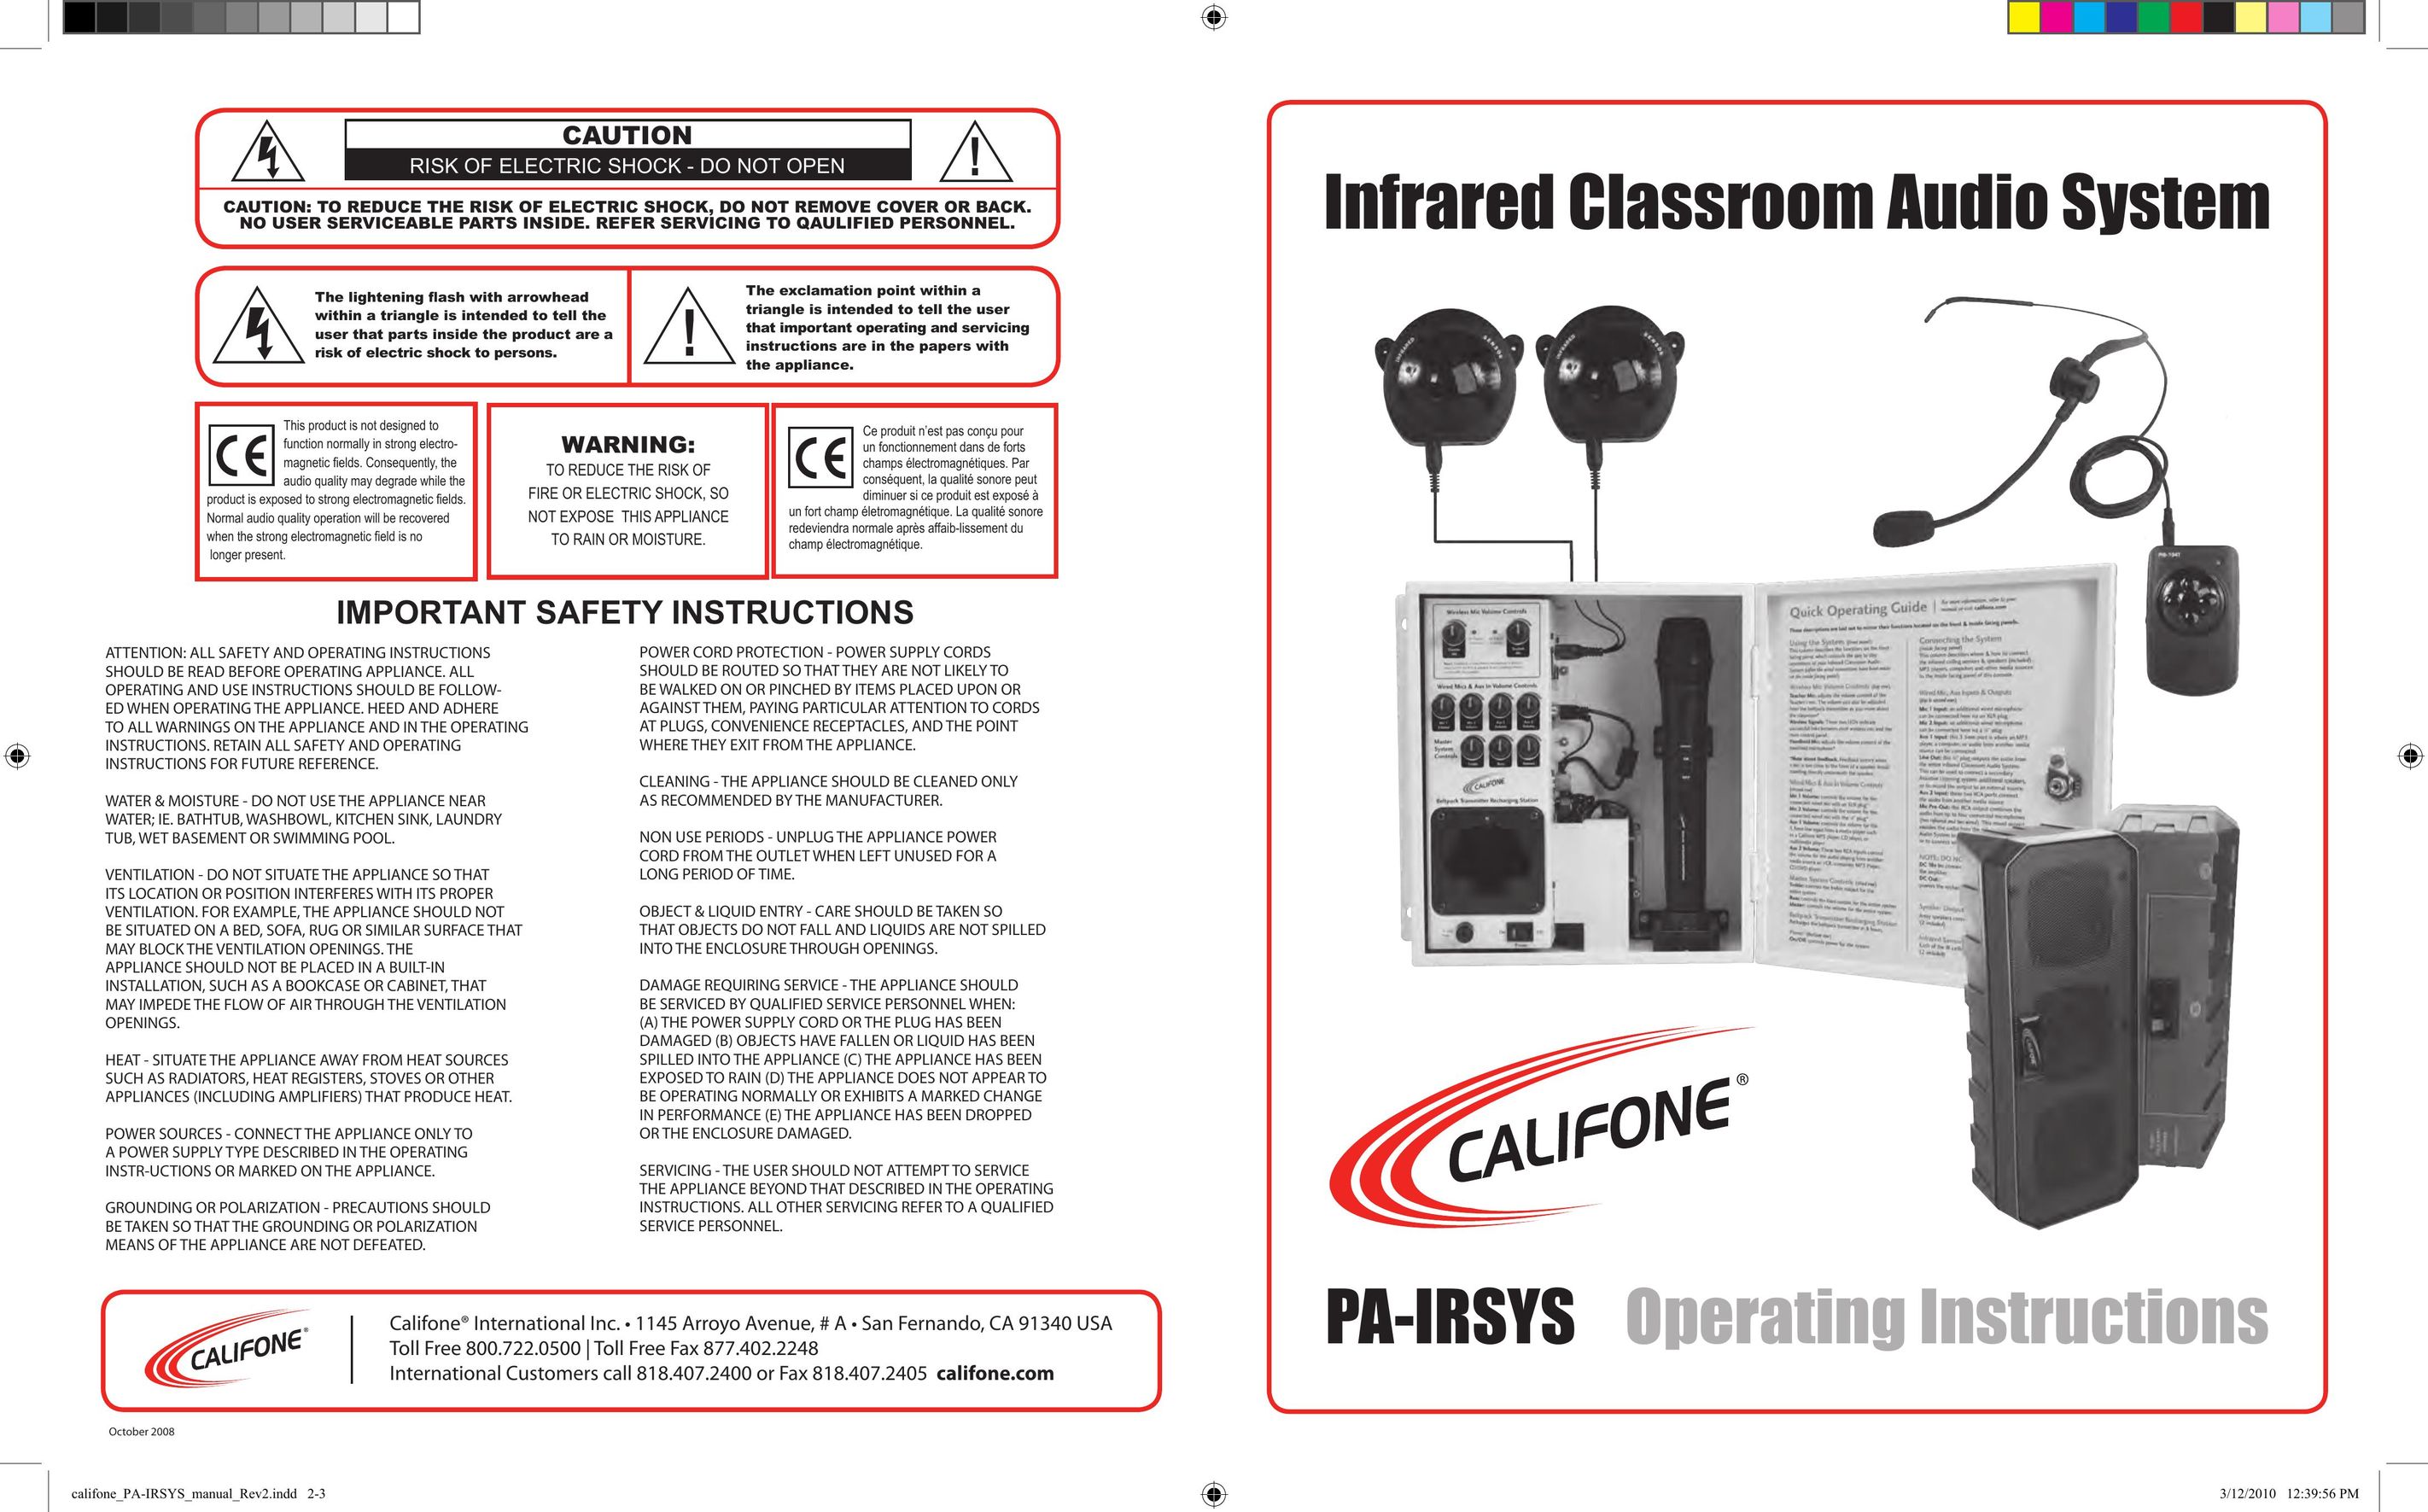 Califone PA-IRSYS Stereo System User Manual